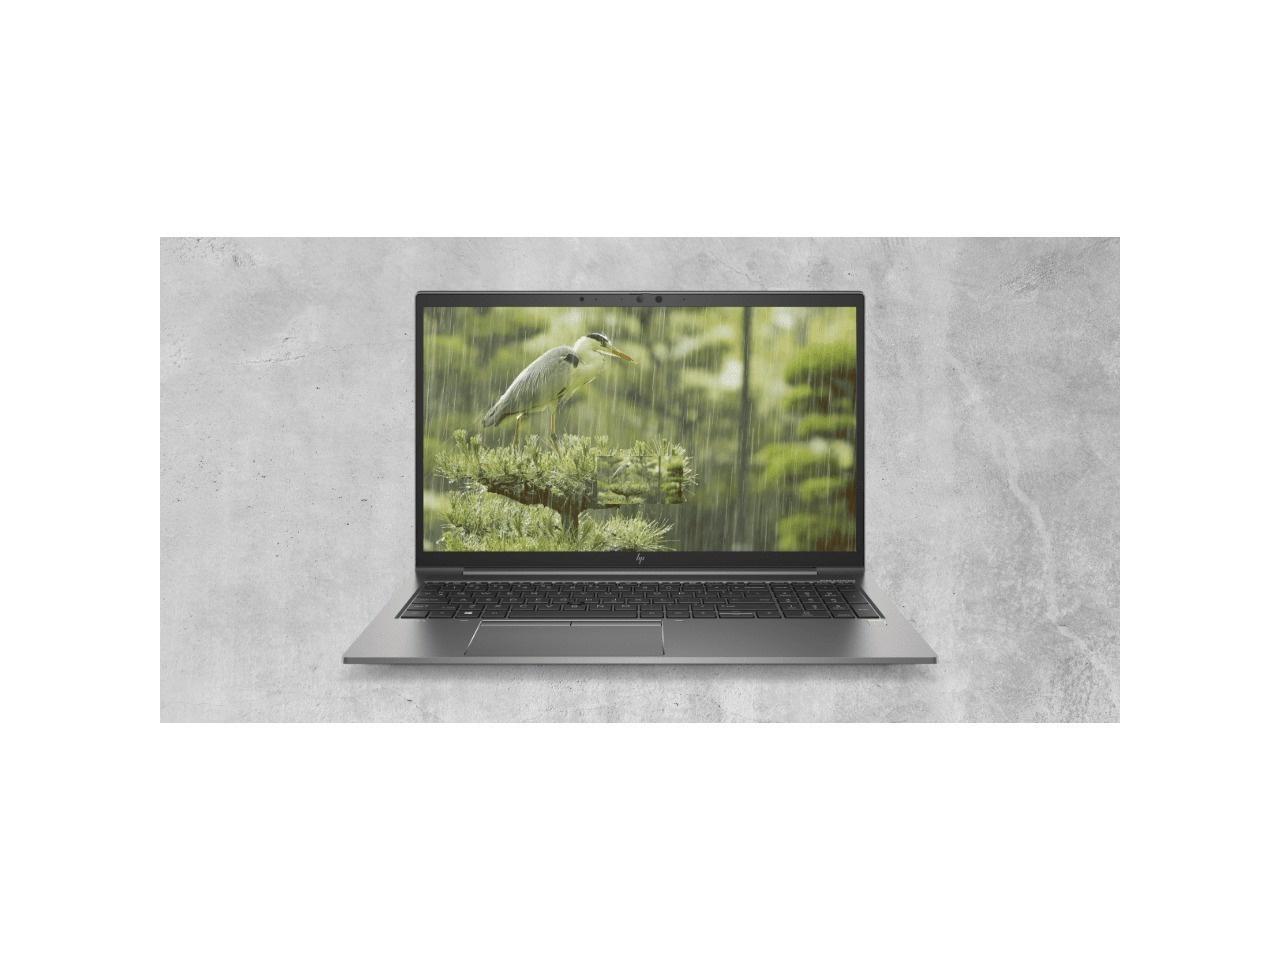 HP ZBook Firefly 14 G7 14" Mobile Workstation - Intel Core i5 (10th Gen) i5-10310U Quad-core (4 Core) 1.70 GHz - 8 GB RAM - 256 GB SSD - Windows 10 Pro - NVIDIA Quadro P520 with 4 GB - In-plane S